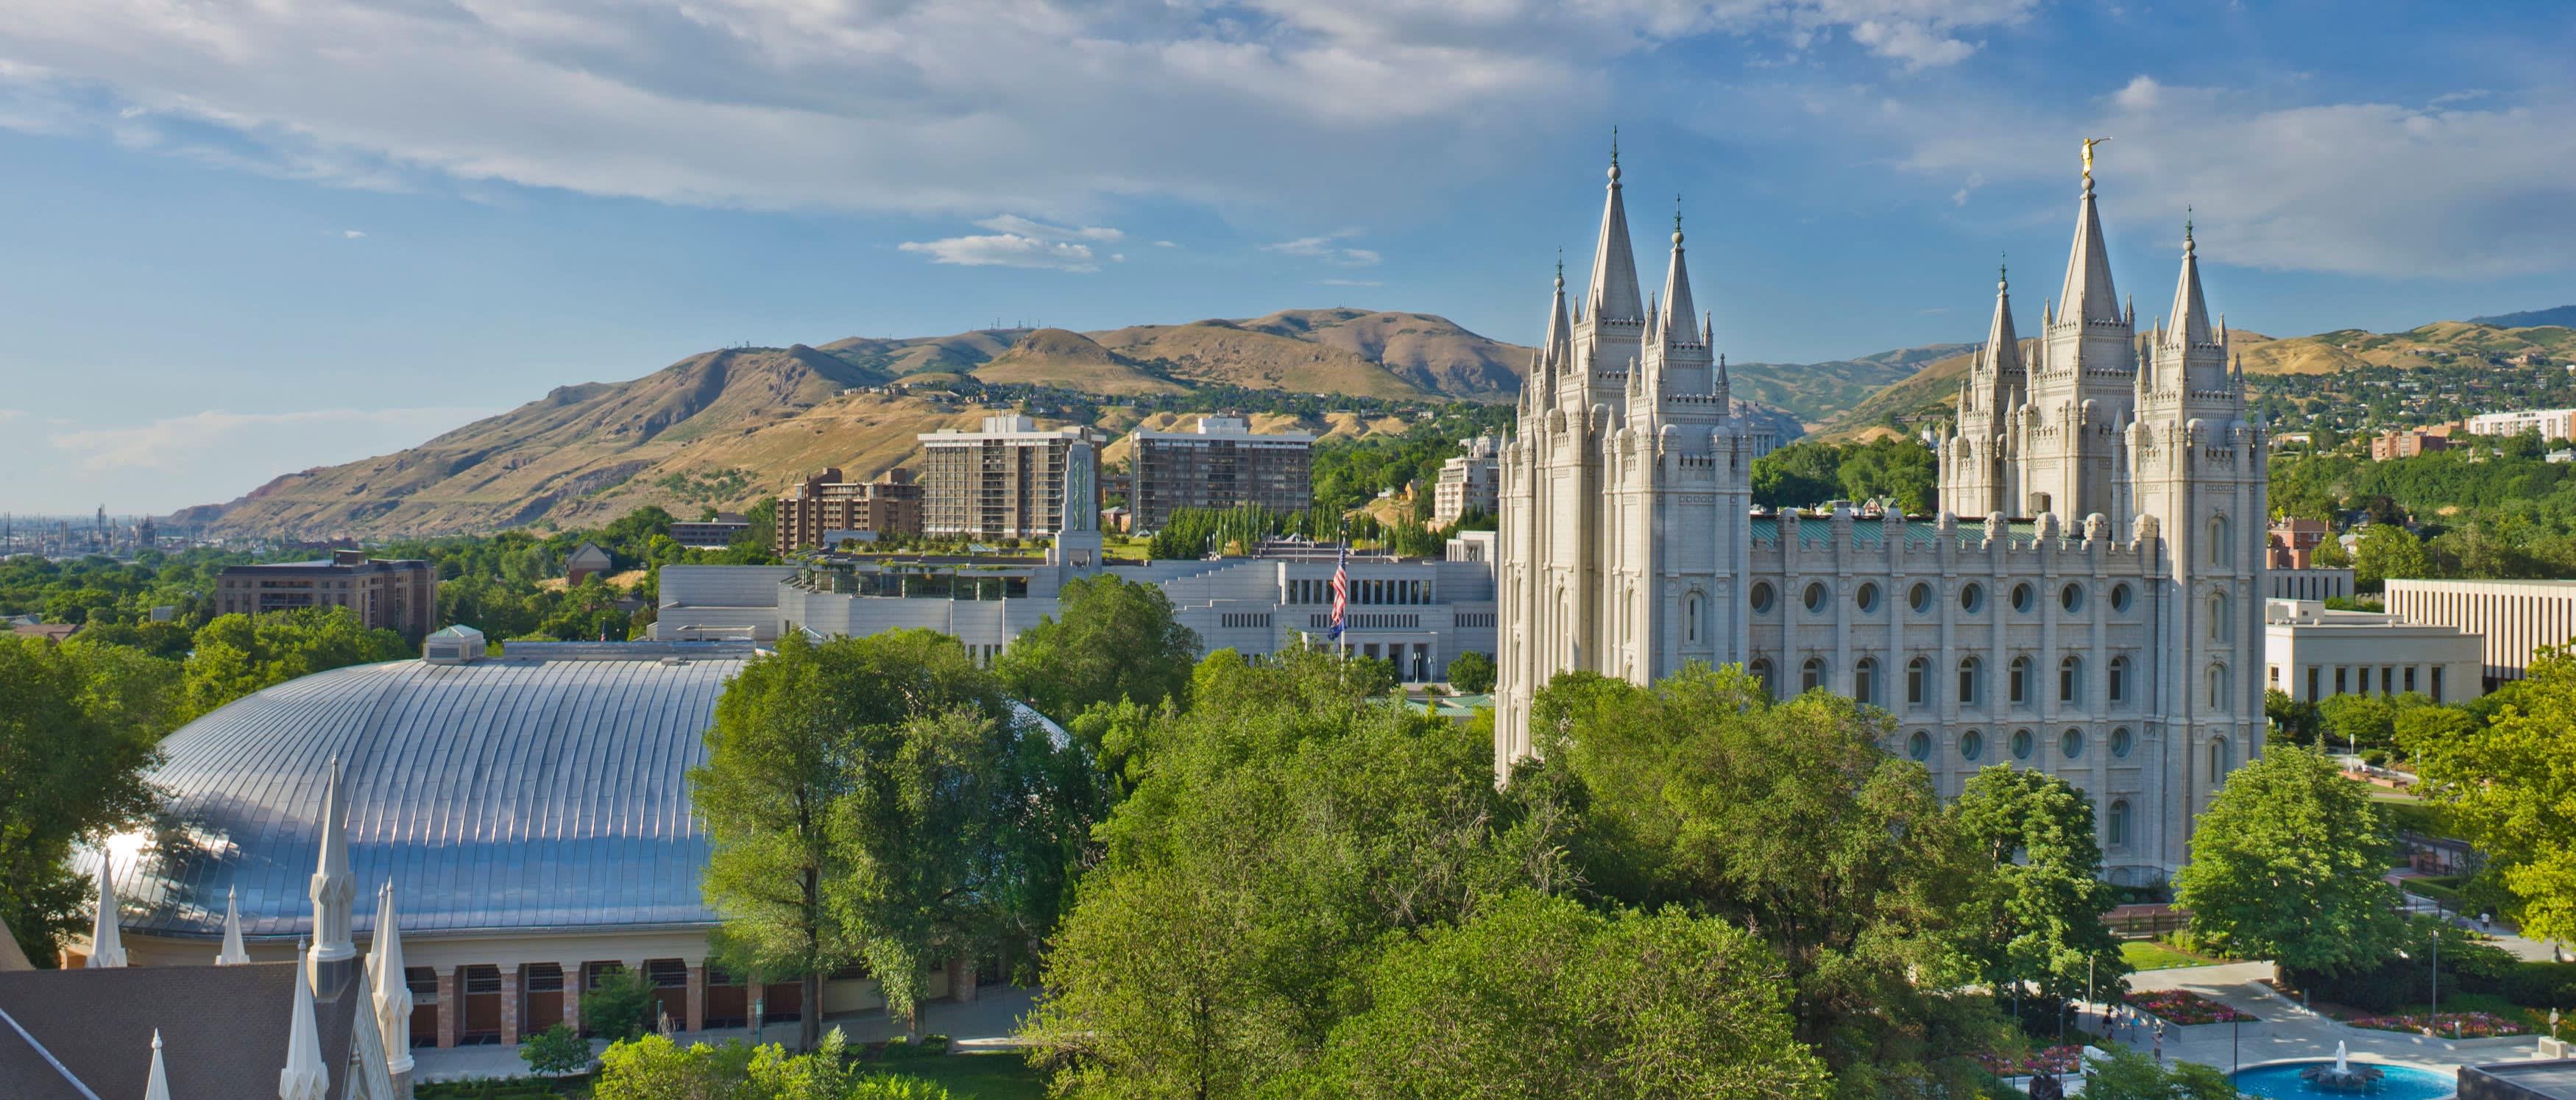 7 Reasons to Visit Temple Square